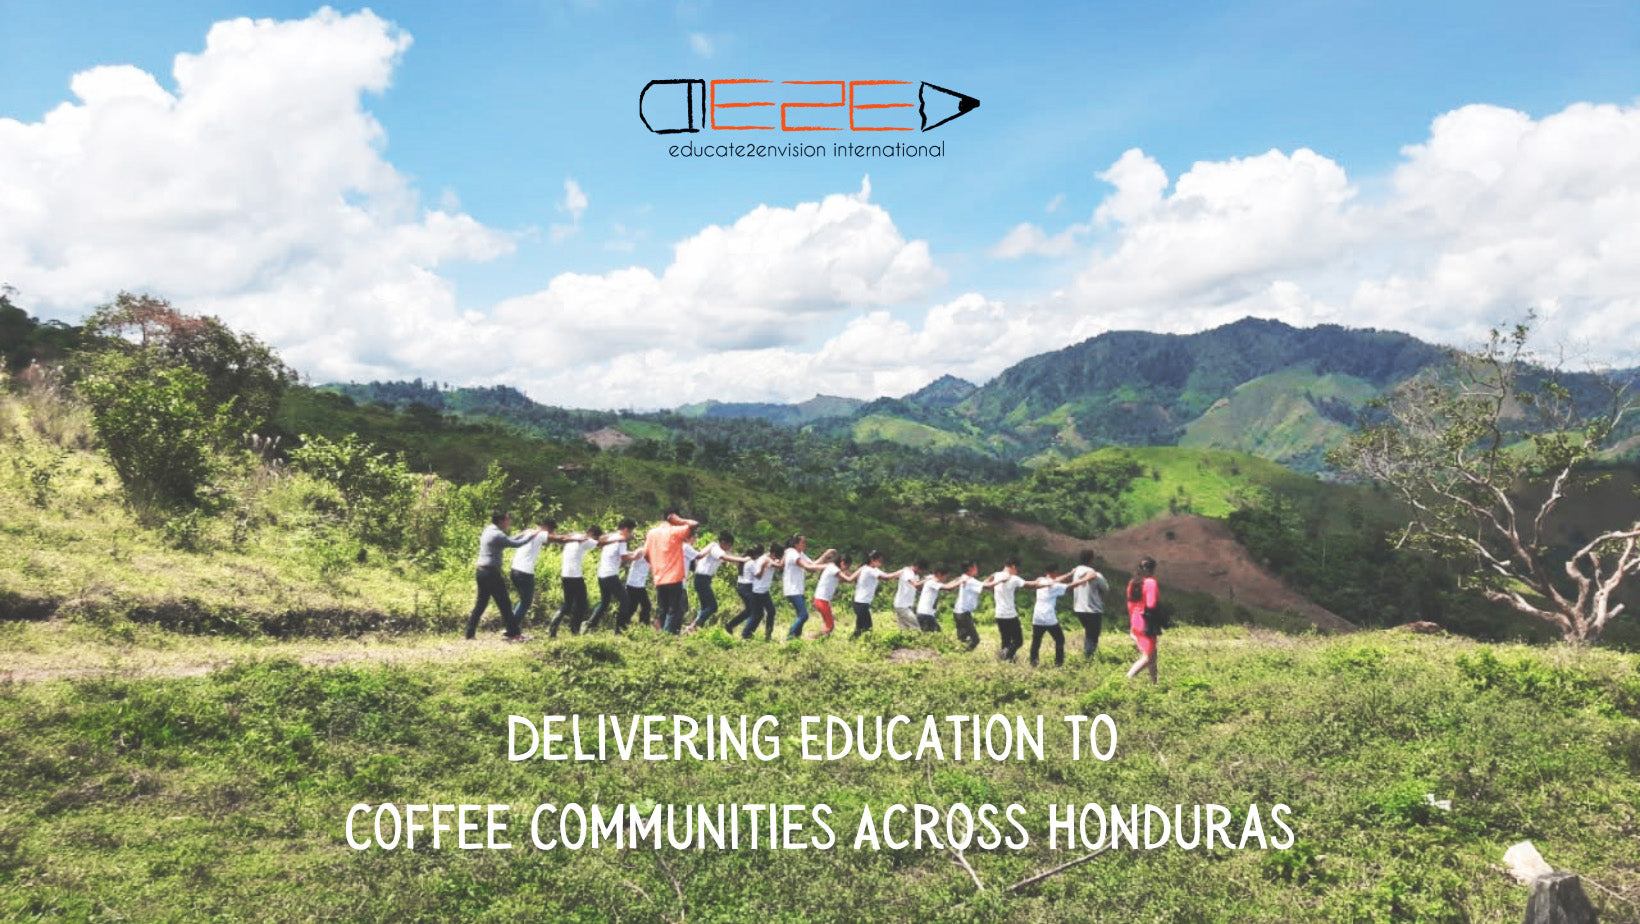 Children playing in a field in rural Honduras under the banner of Educate2Envision: Delivering Education to Coffee Communities Across Honduras.